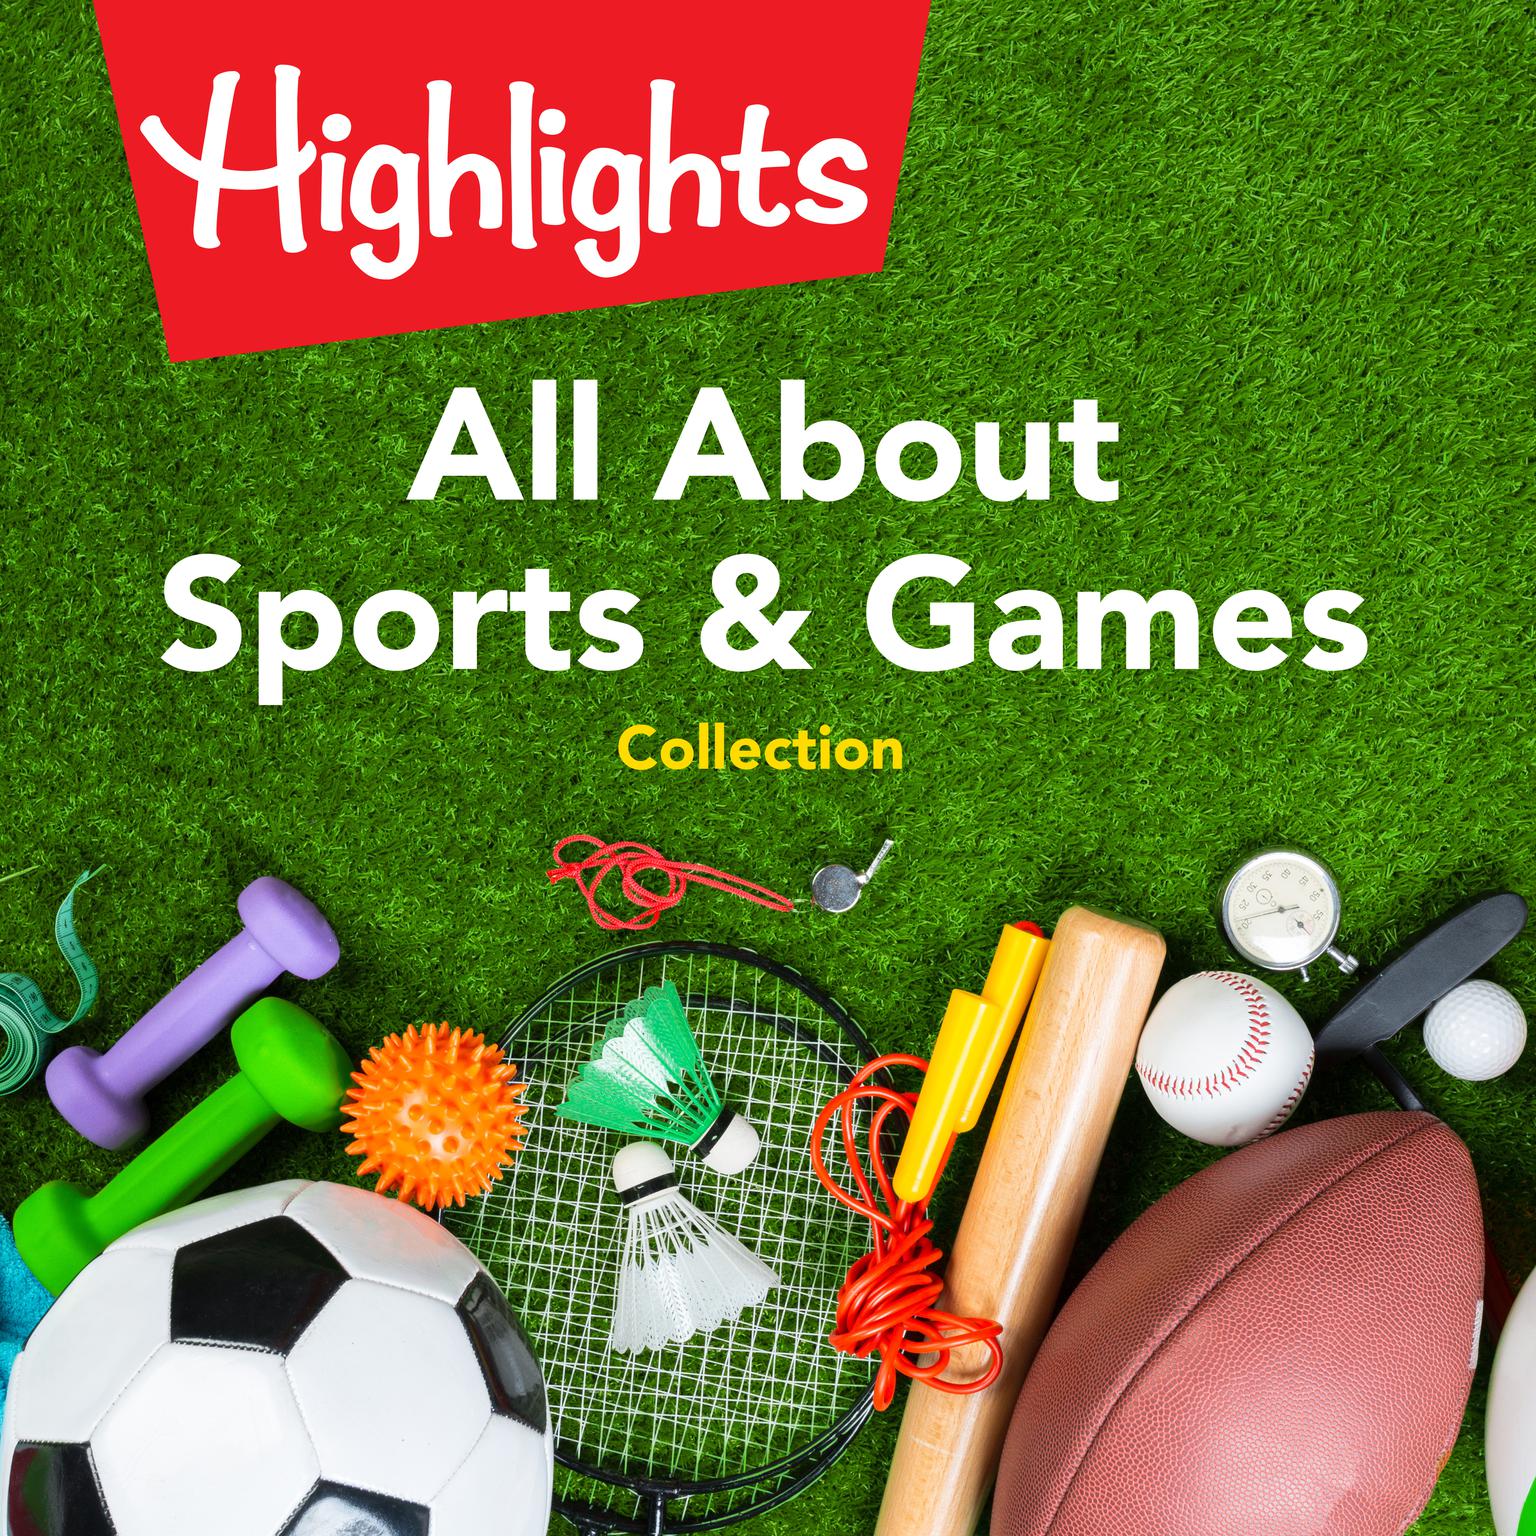 All About Sports & Games Collection Audiobook, by Highlights for Children